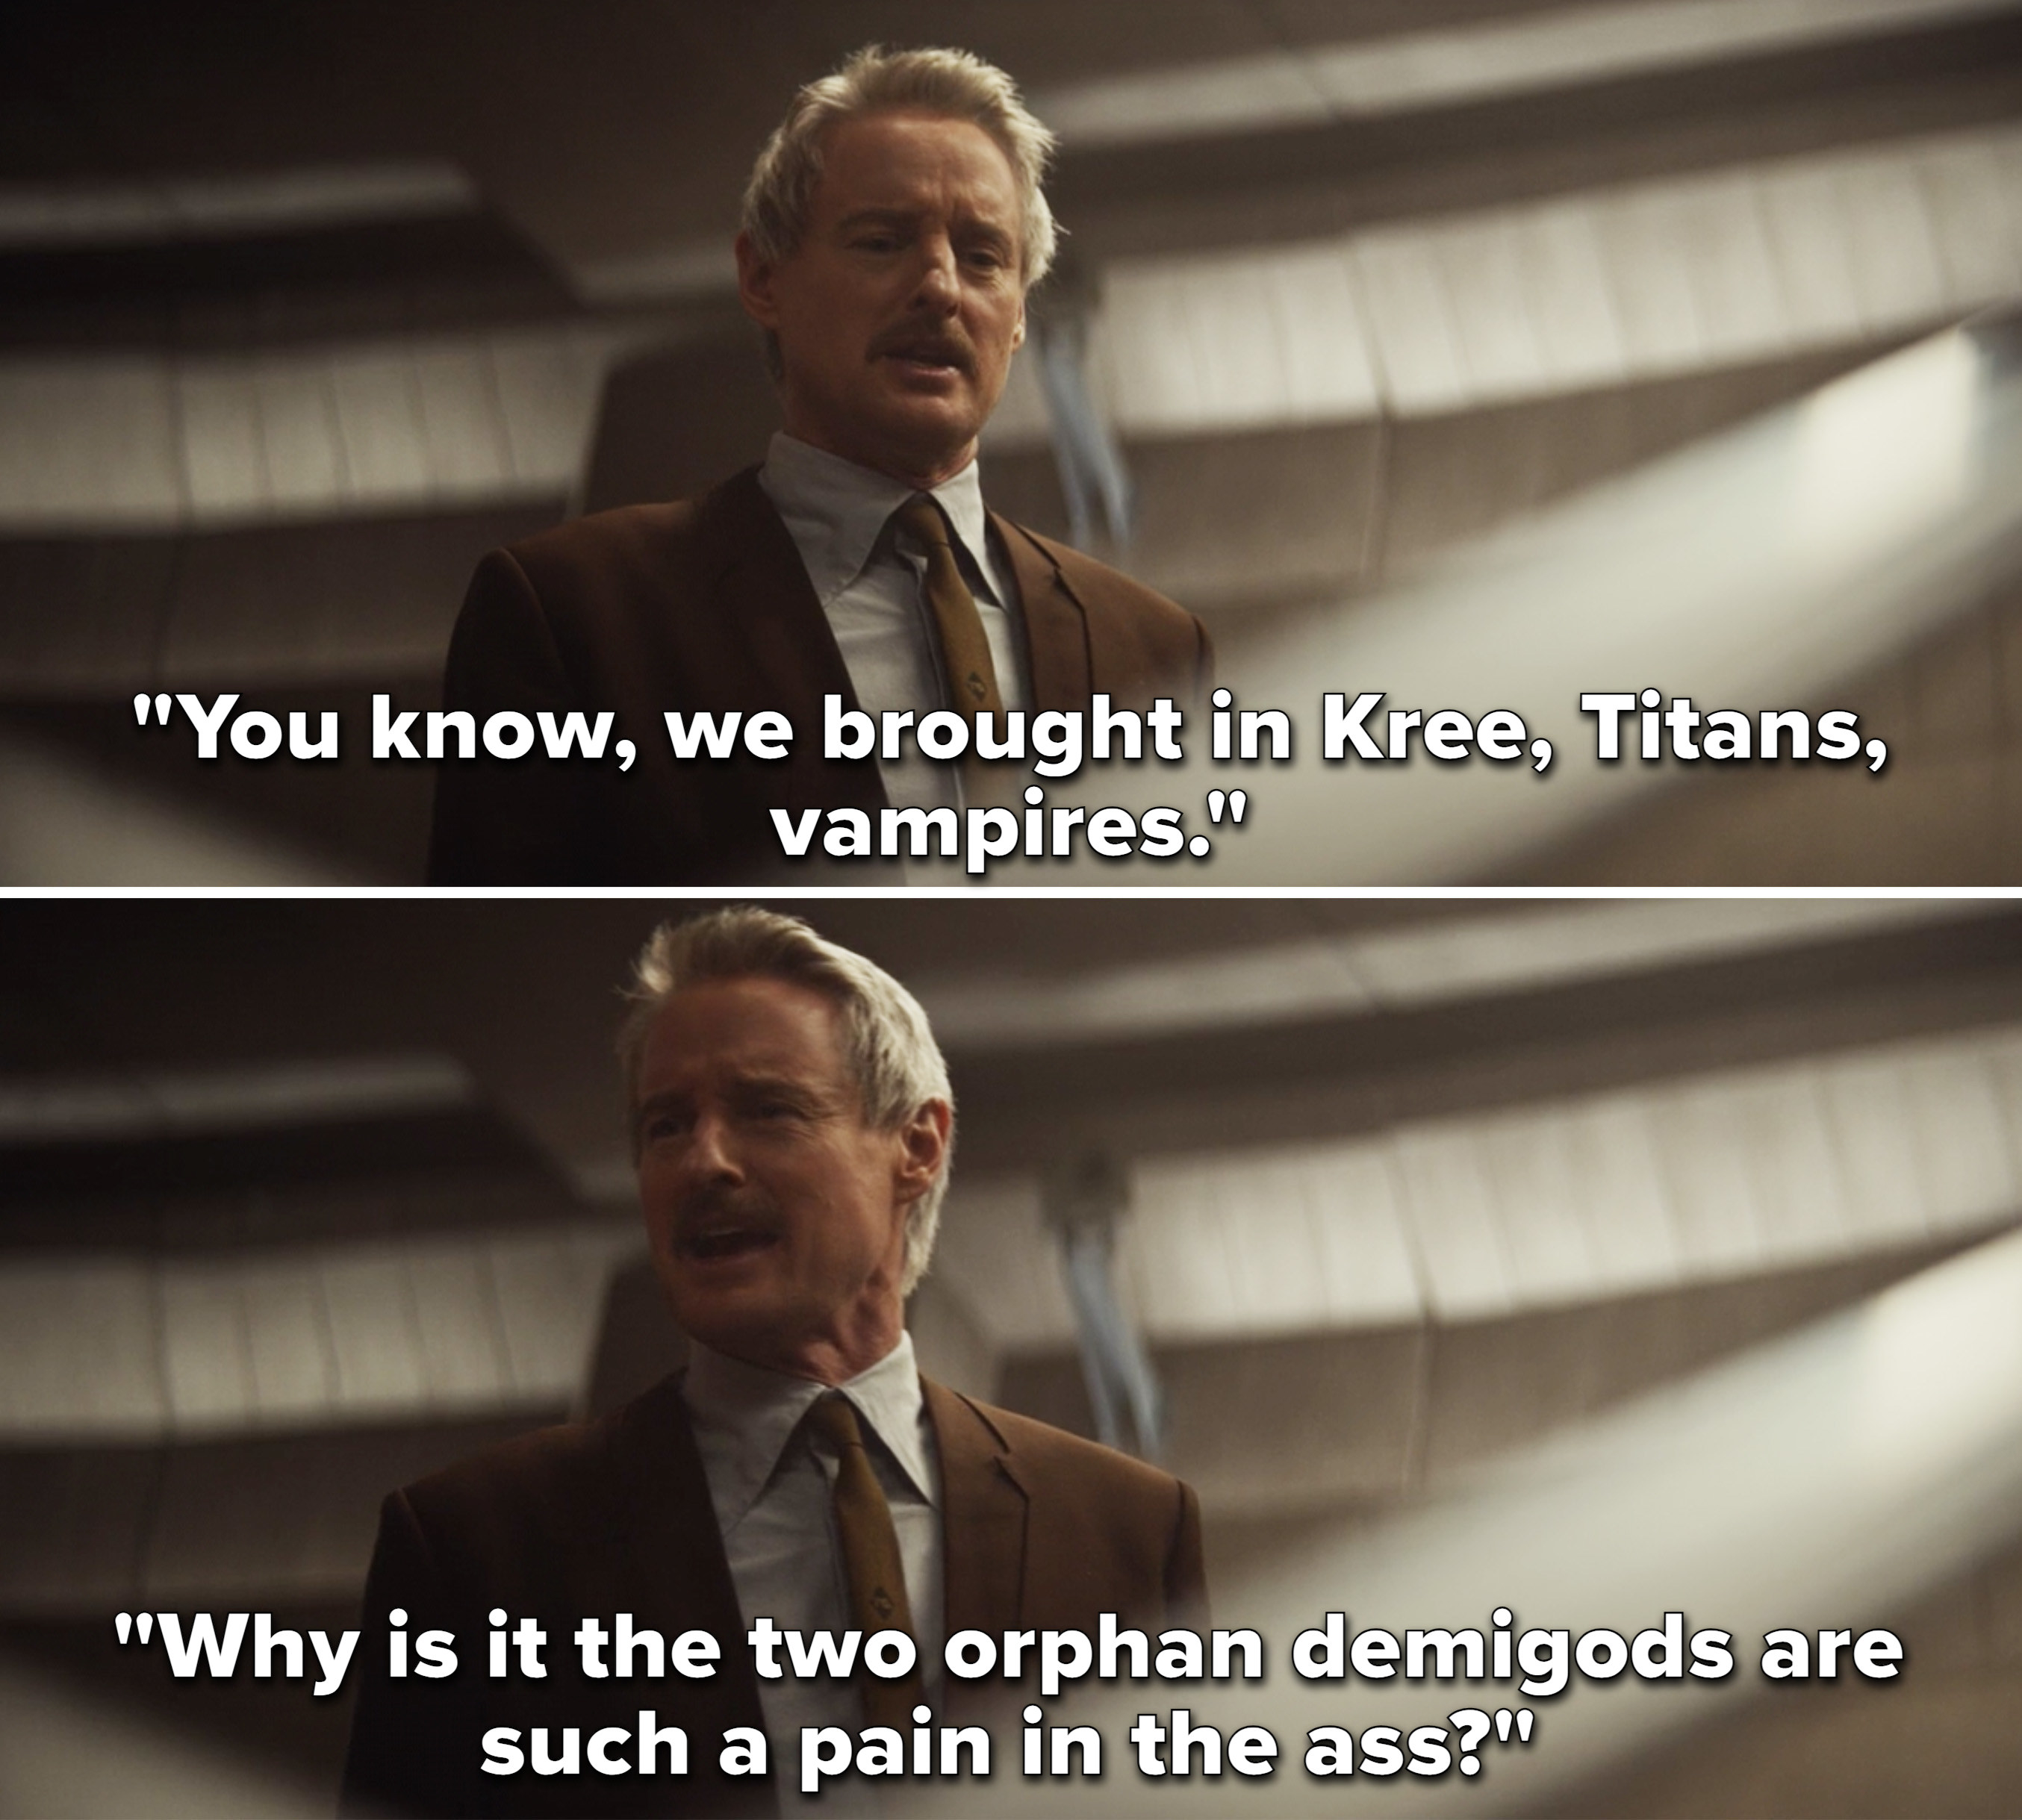 Mobius saying, &quot;You know, we brought in Kree, Titans, vampires. Why is it the two orphan demigods are such a pain in the ass?&quot;